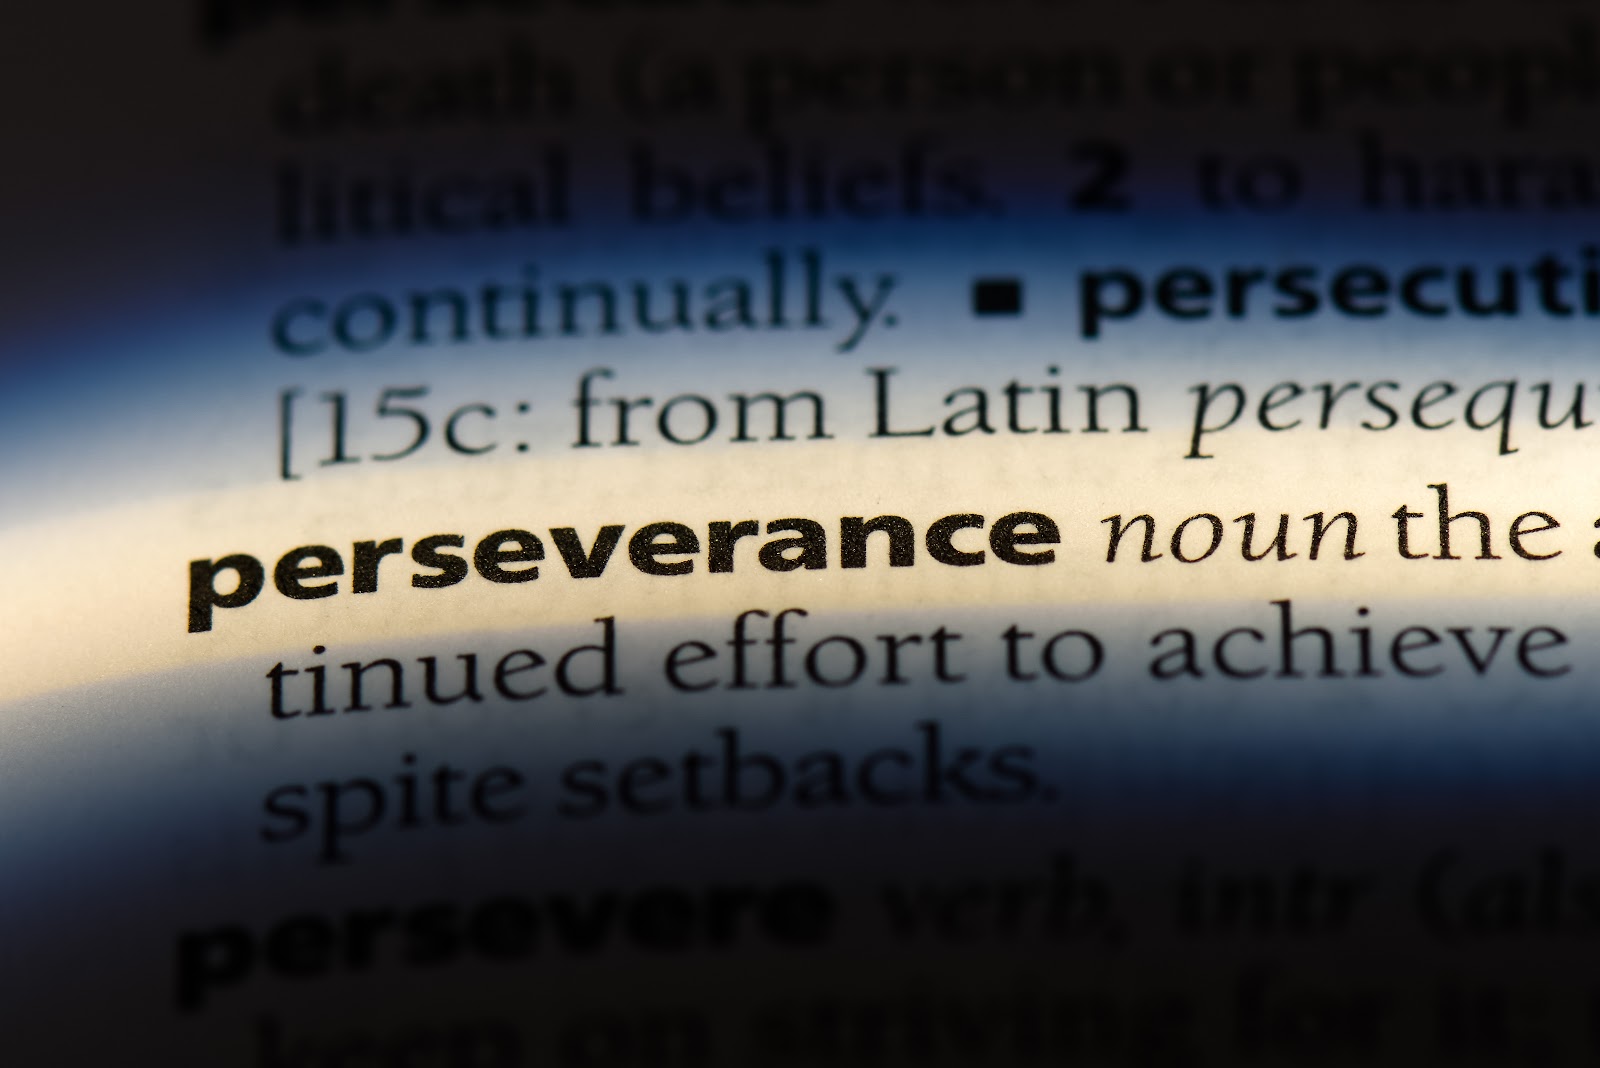 quran verse about perseverance